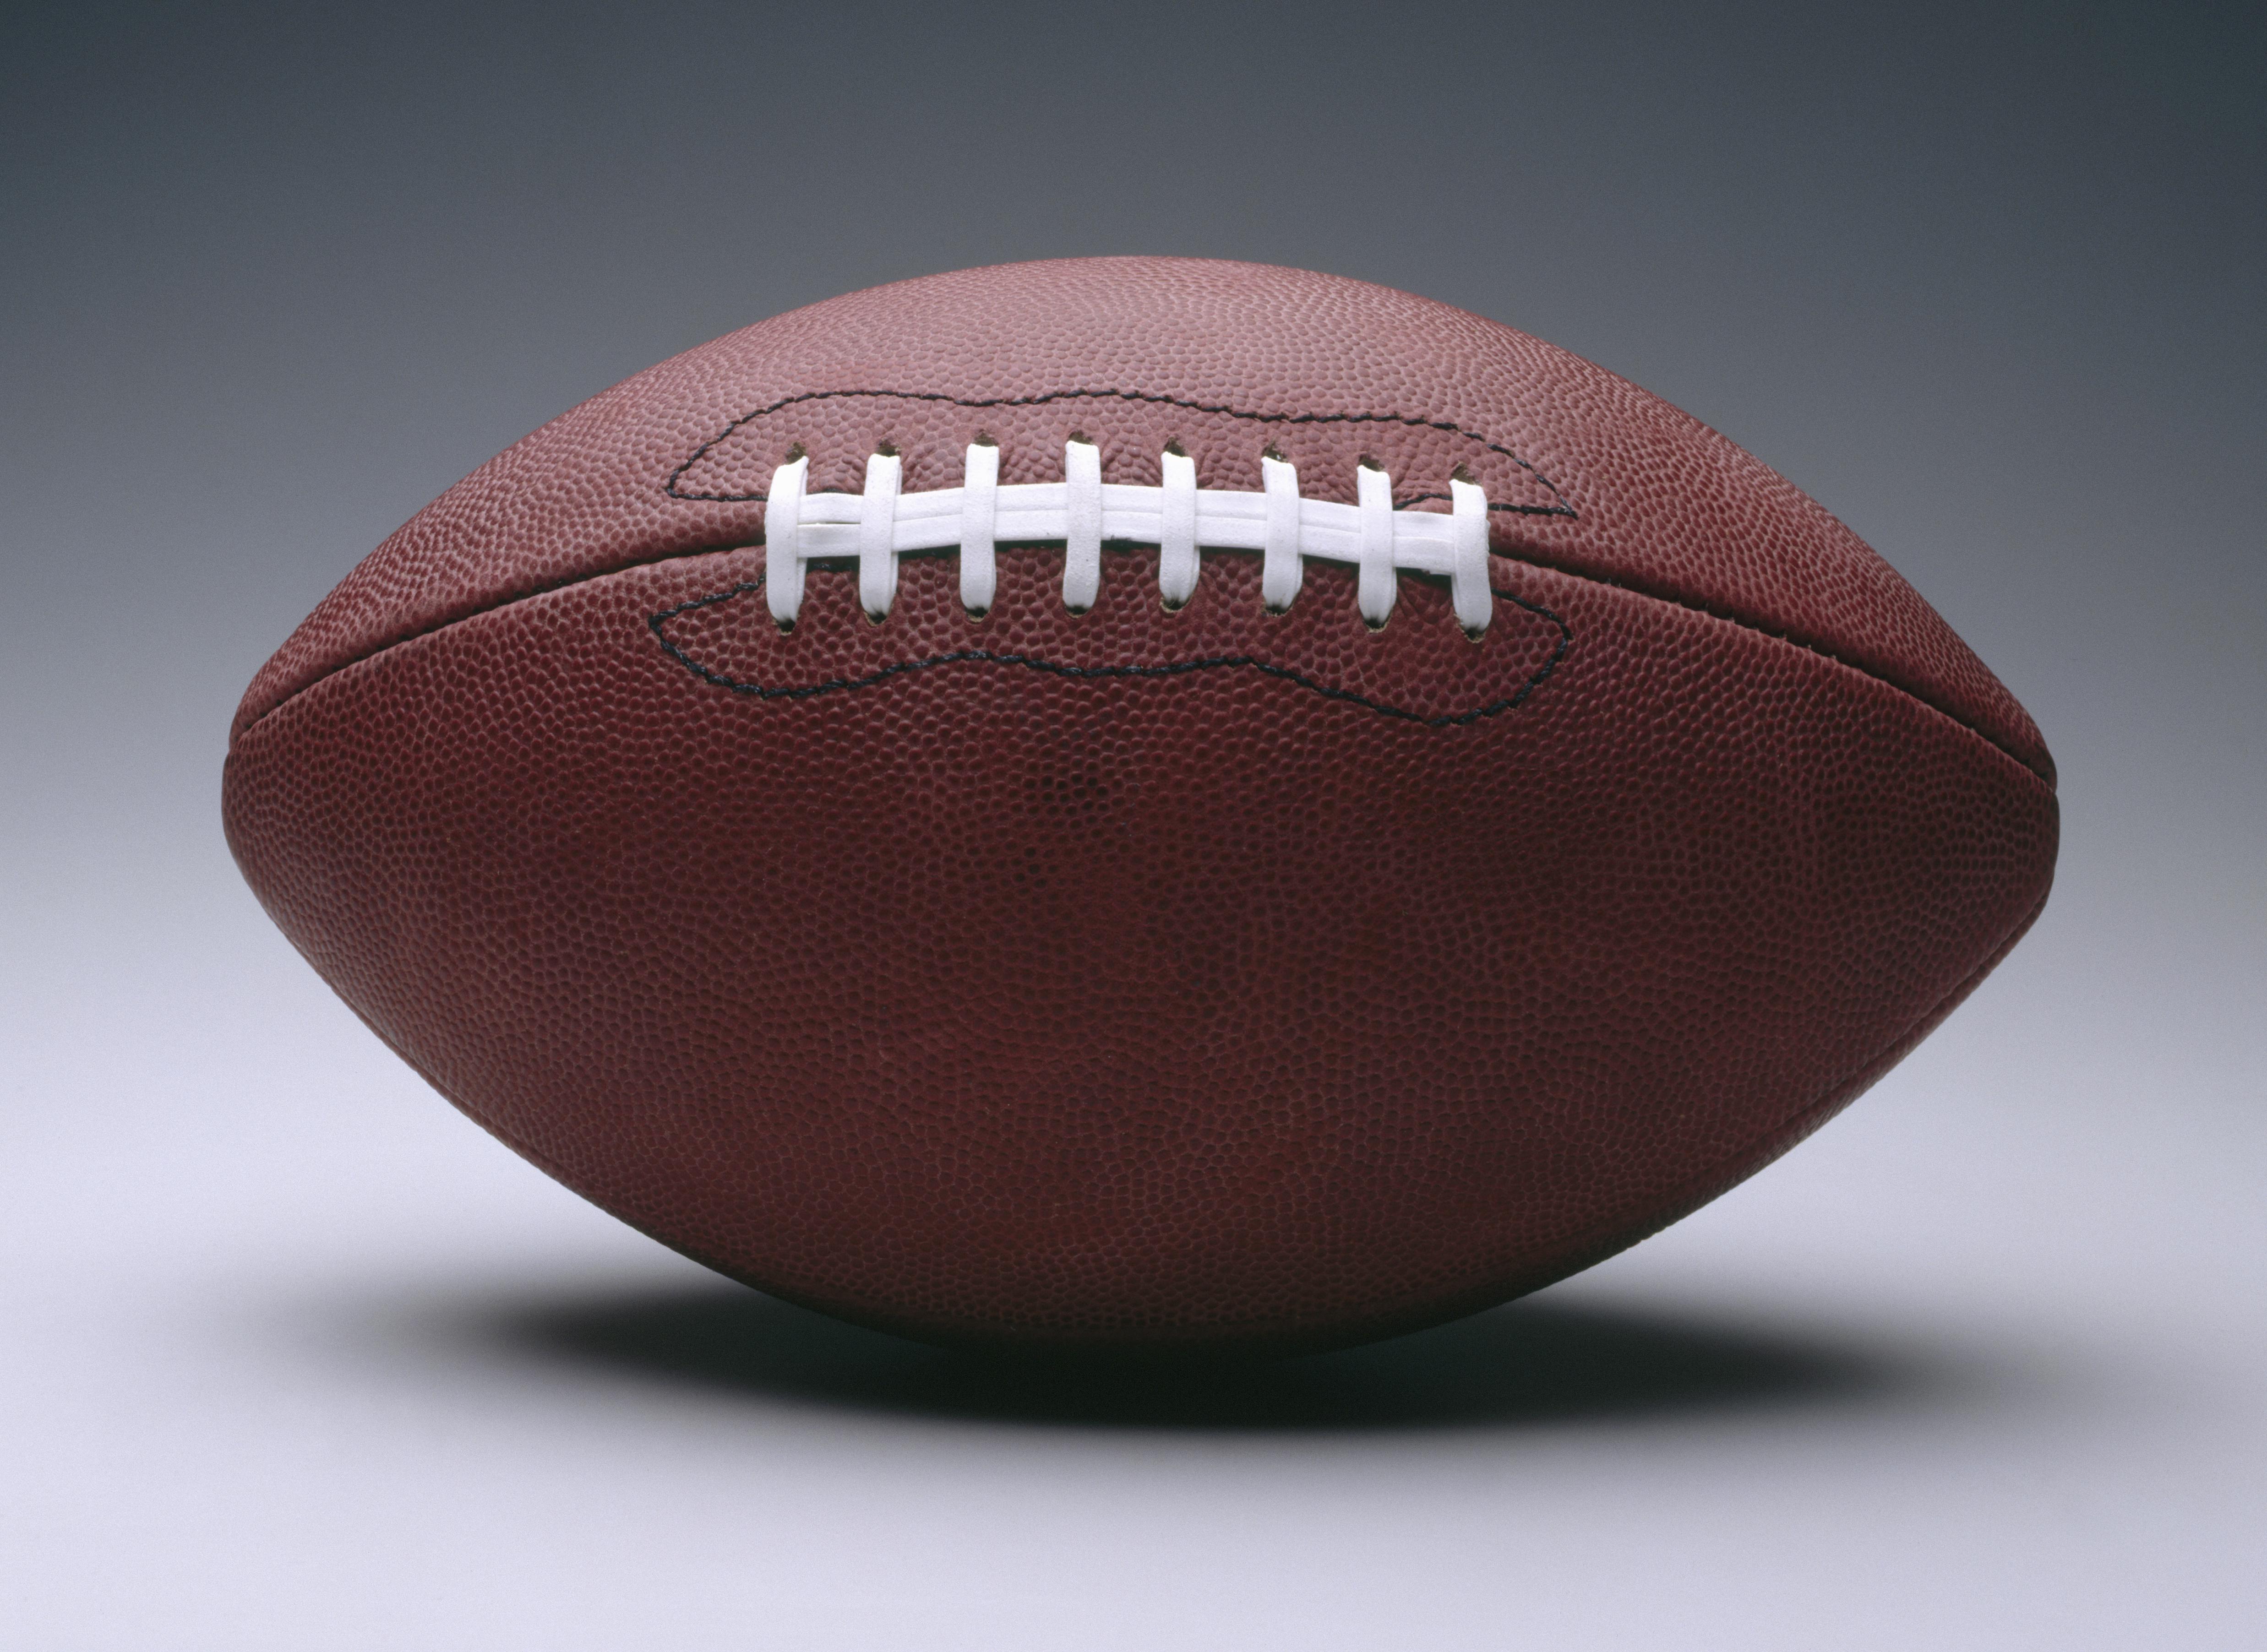 American football with white seam, plain background